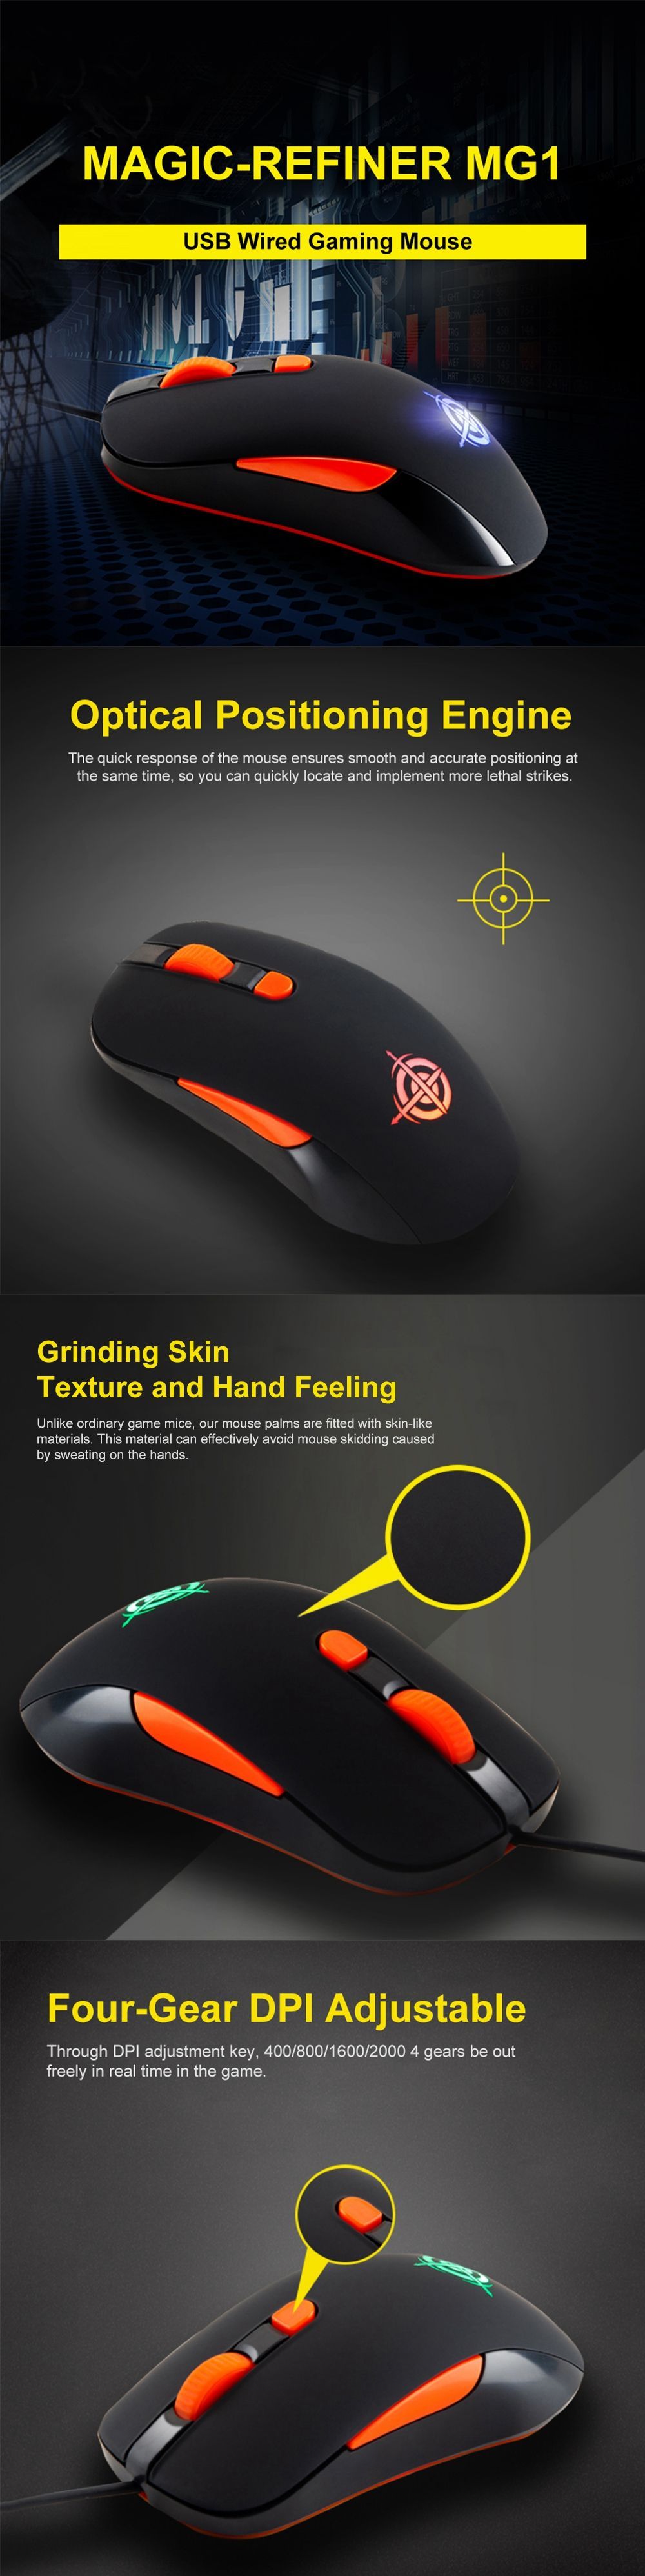 MAGIC-REFINER-MG1-USB-Wired-6-Keys-2000-DPI-Adjustable-Optical-Gaming-Mouse-with-2m-Cable-1578266